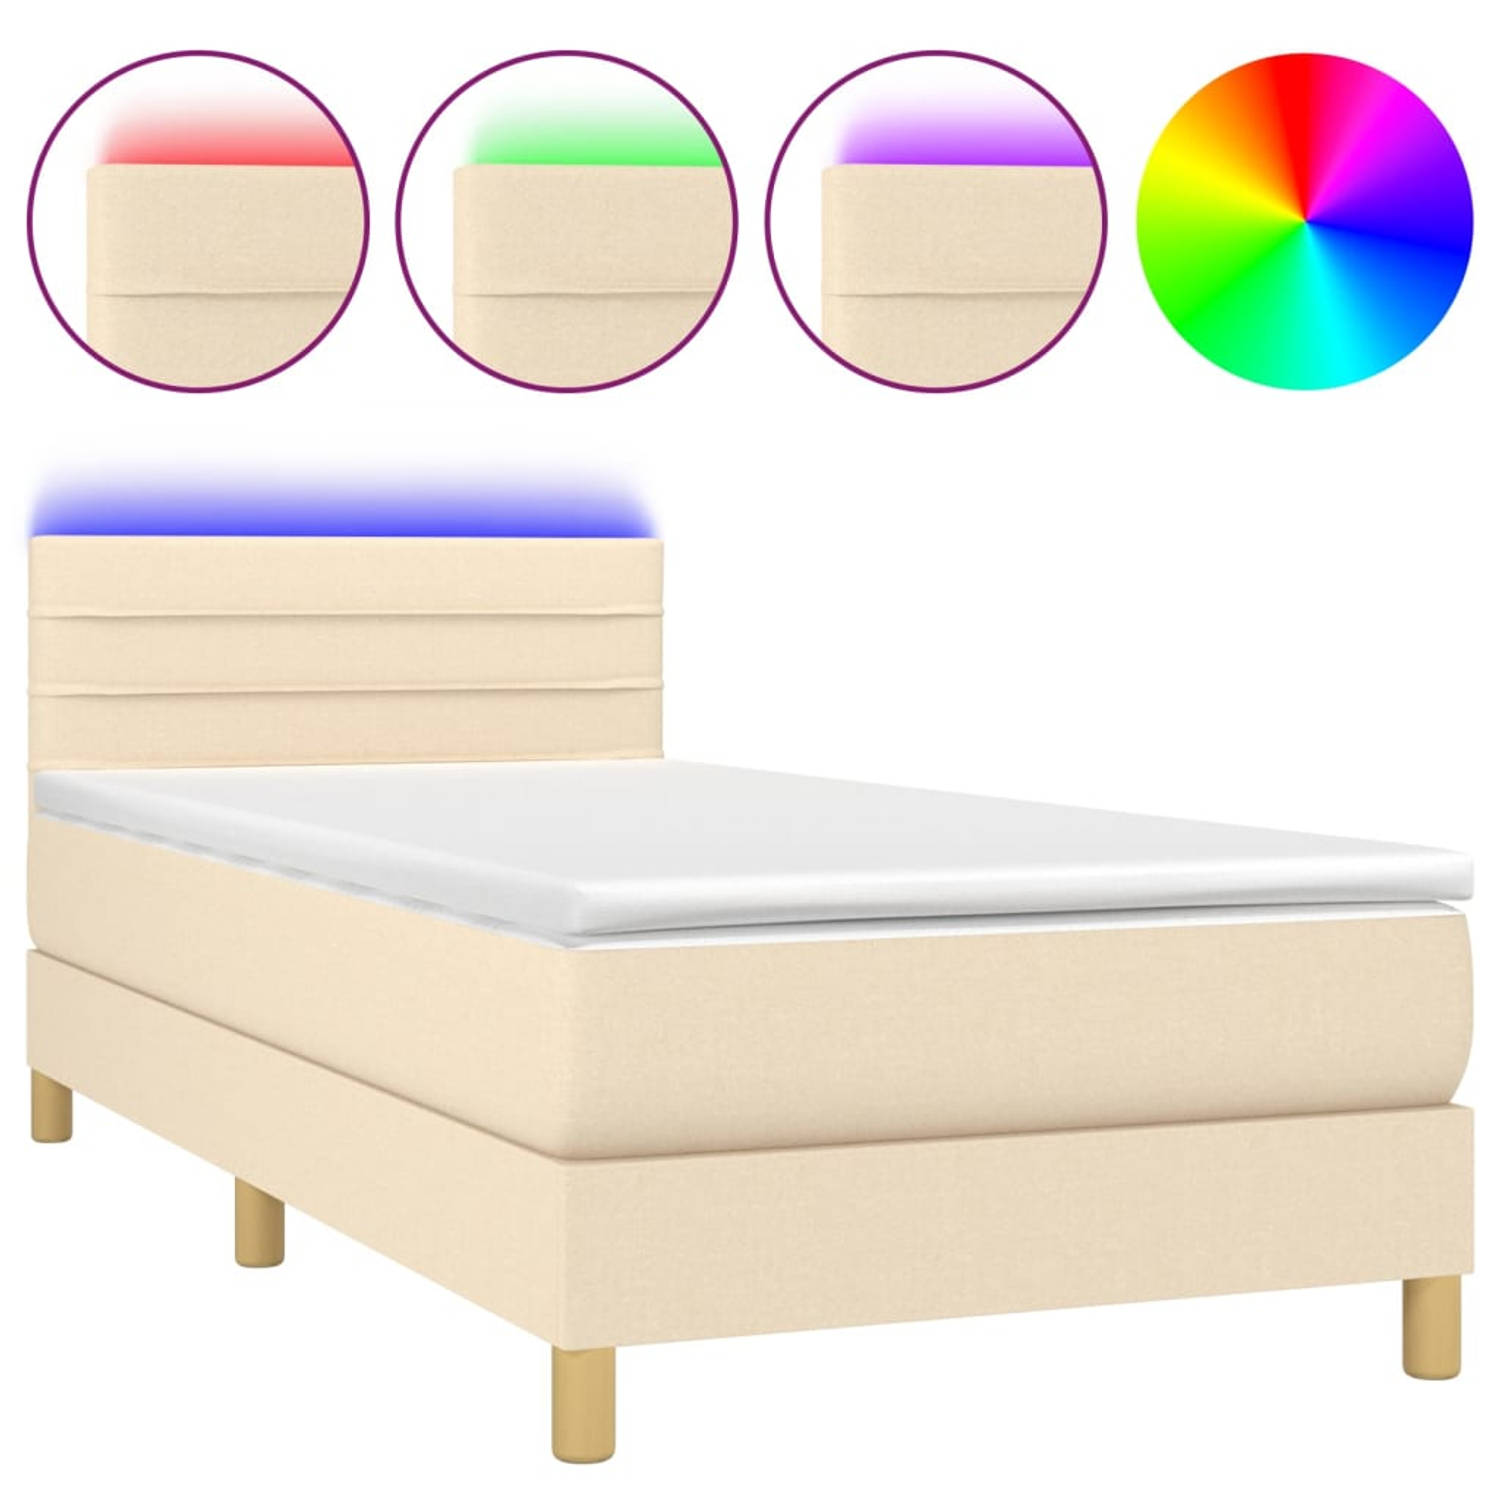 The Living Store Boxspring met matras en LED stof crèmekleurig 100x200 cm - Boxspring - Boxsprings - Bed - Slaapmeubel - Boxspringbed - Boxspring Bed - Tweepersoonsbed - Bed Met Ma